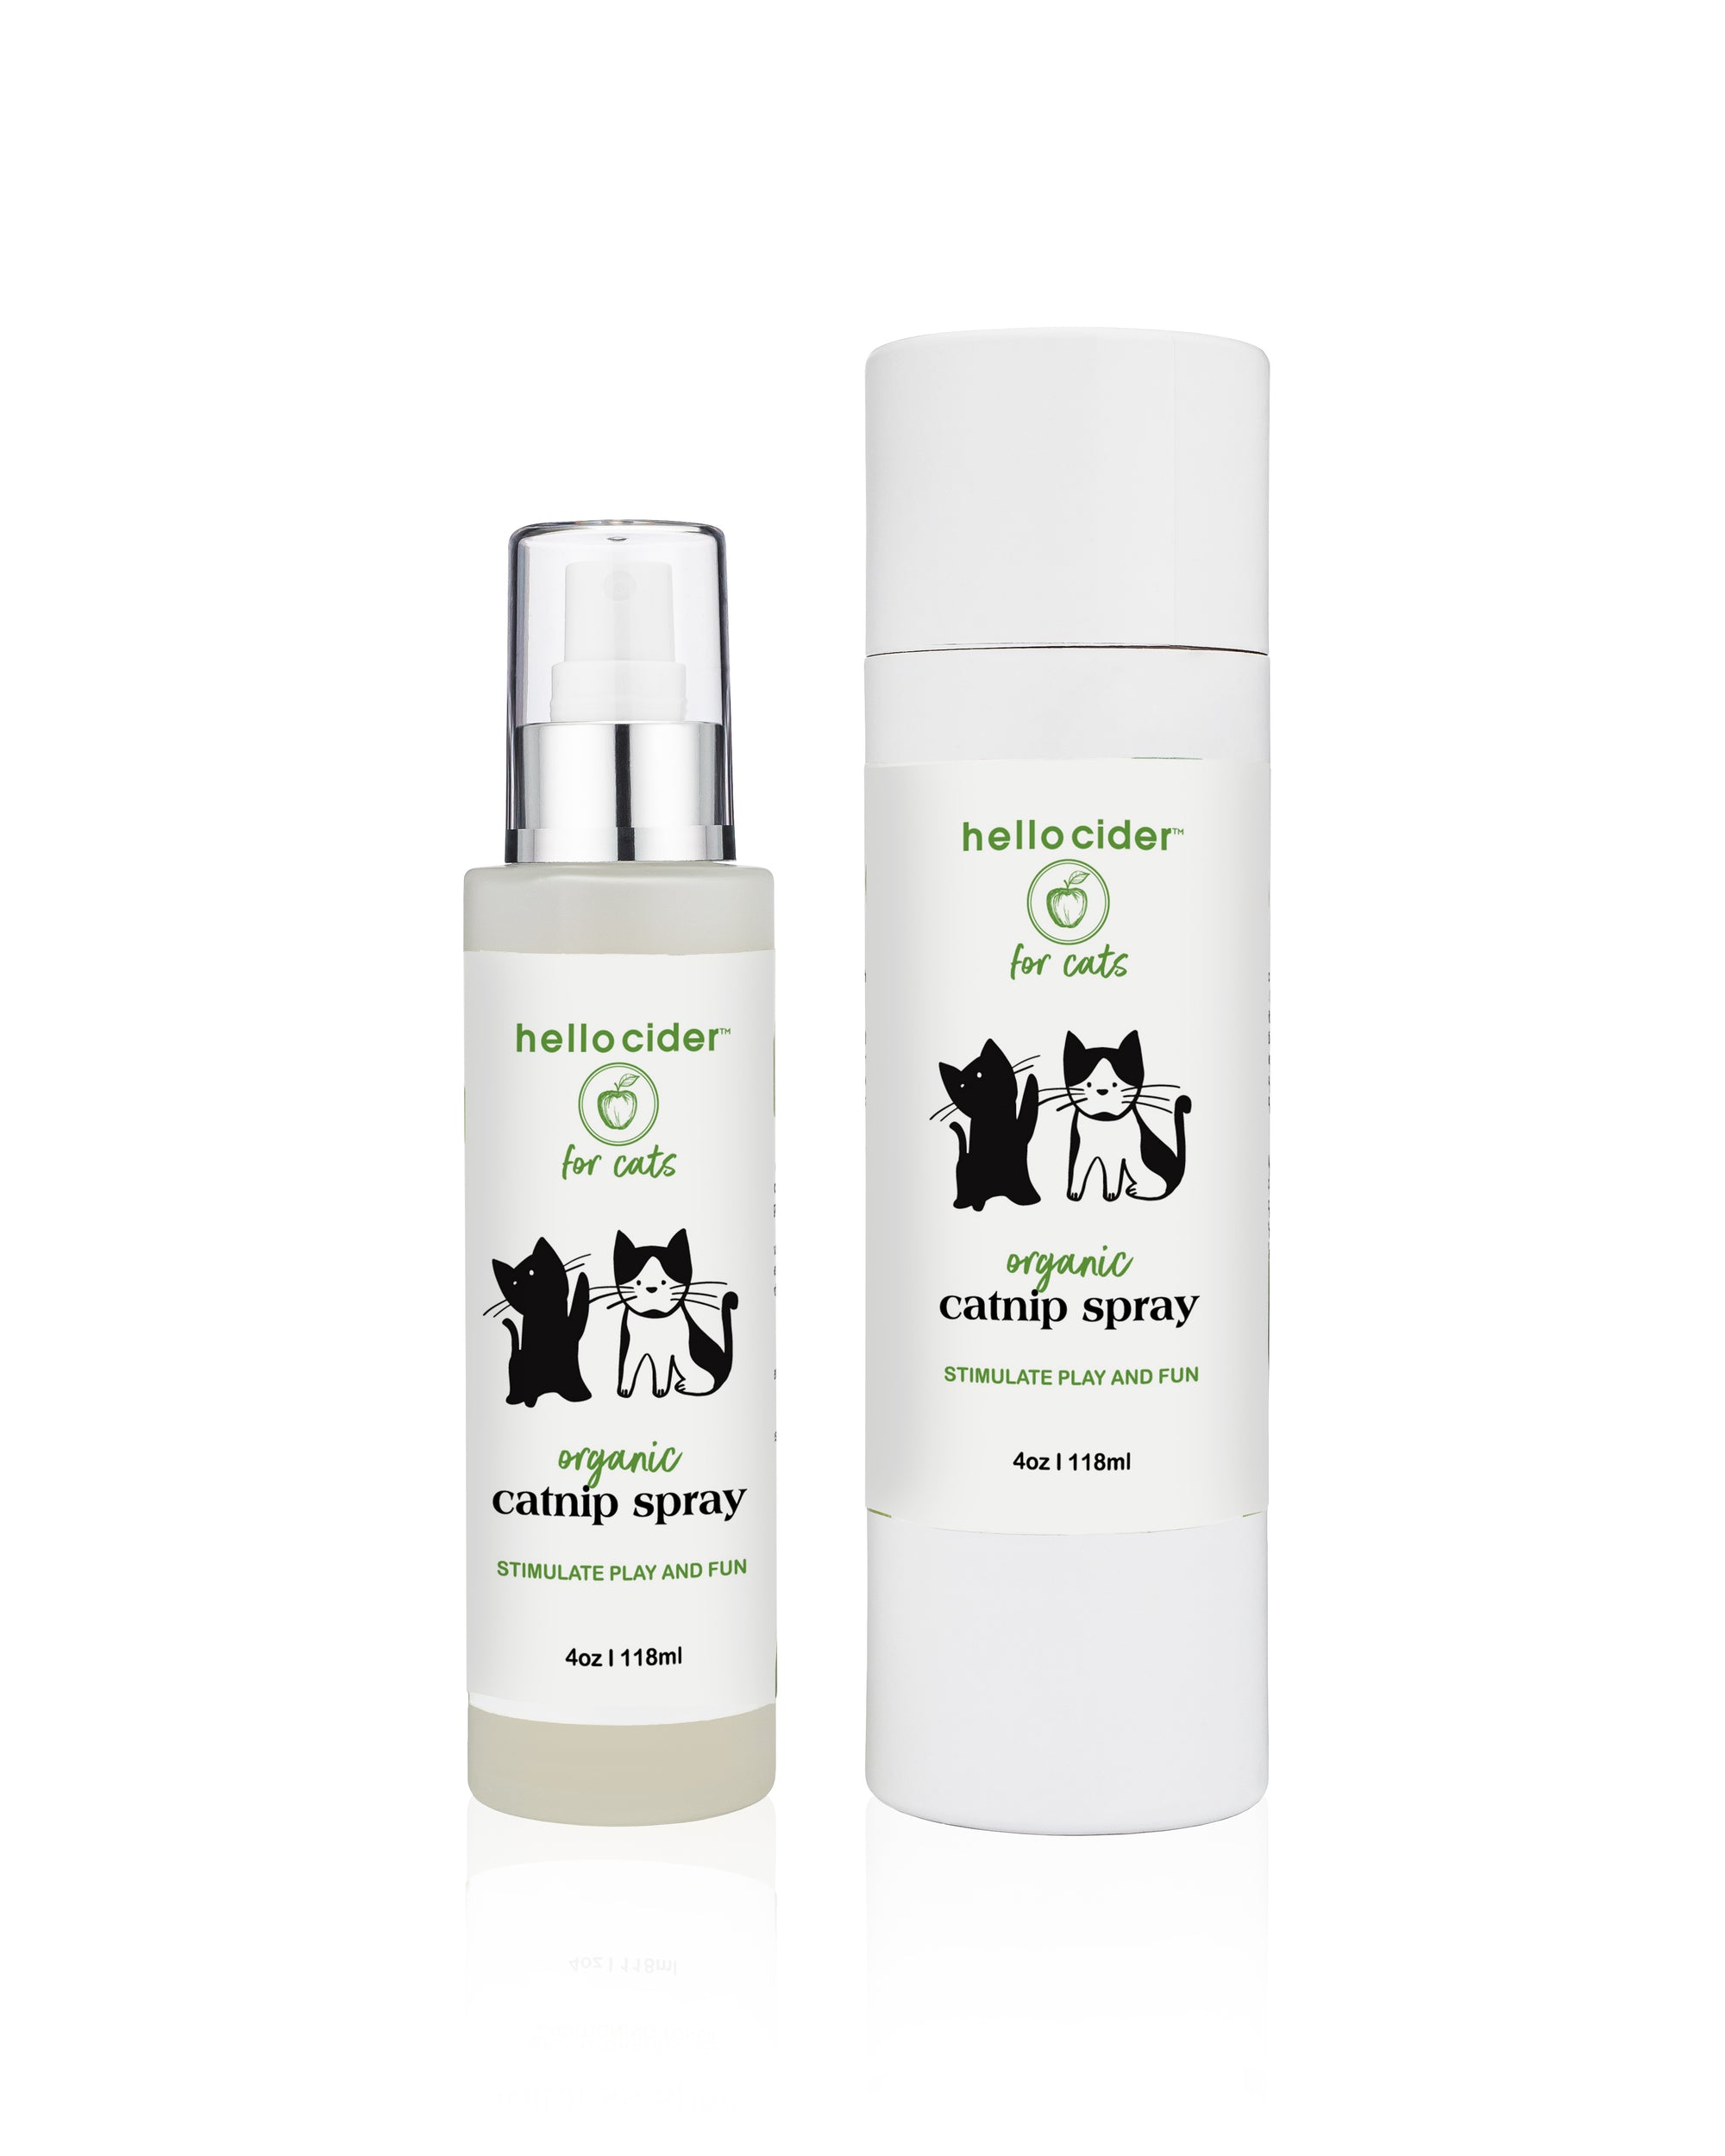 Organic Catnip hydrosol for cats - coming May 1st (free cat toy with each bottle)